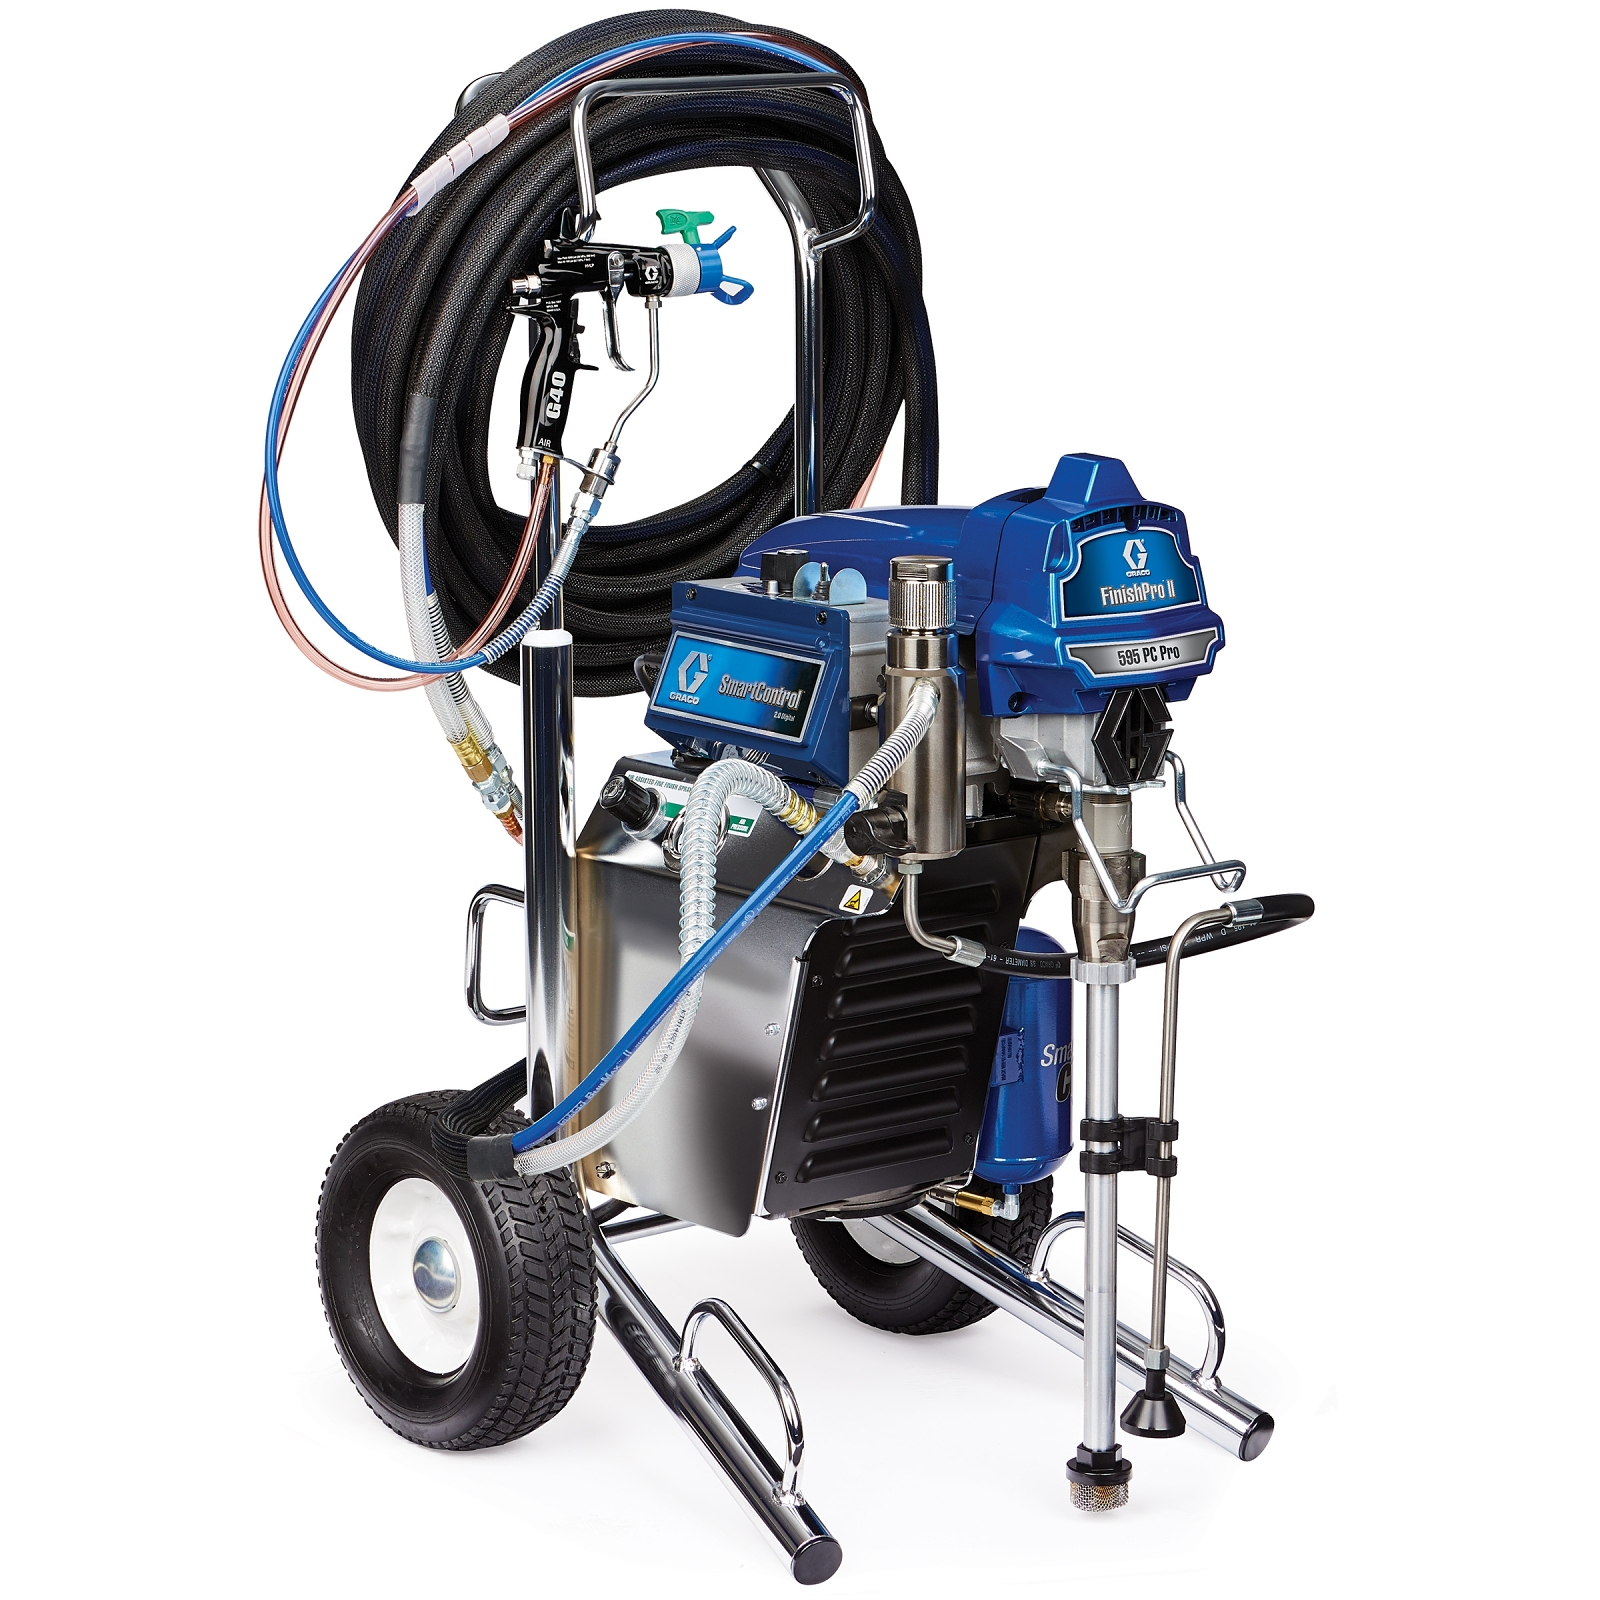 Graco air-assisted airless sprayer